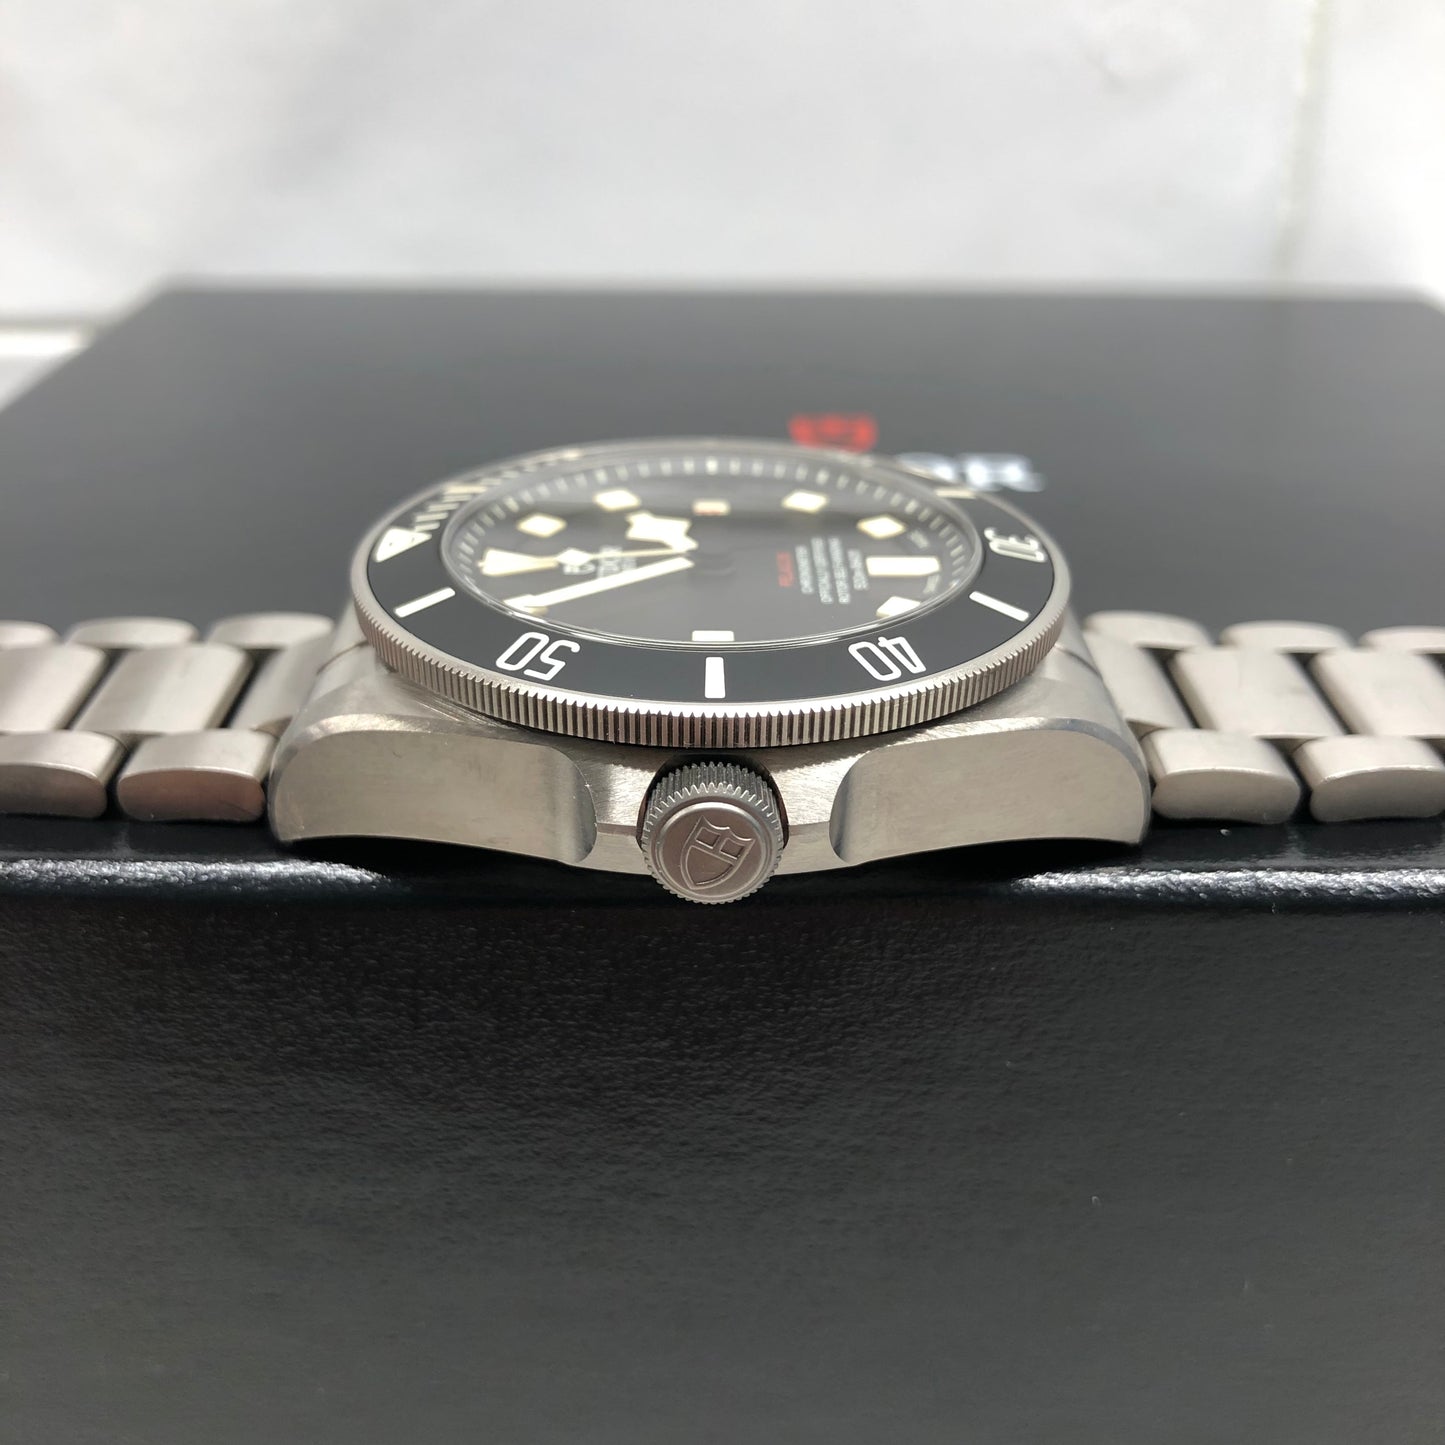 2018 Tudor Pelagos LHD 25610TNL Titanium Automatic 42mm Wristwatch with Box and Papers - Hashtag Watch Company